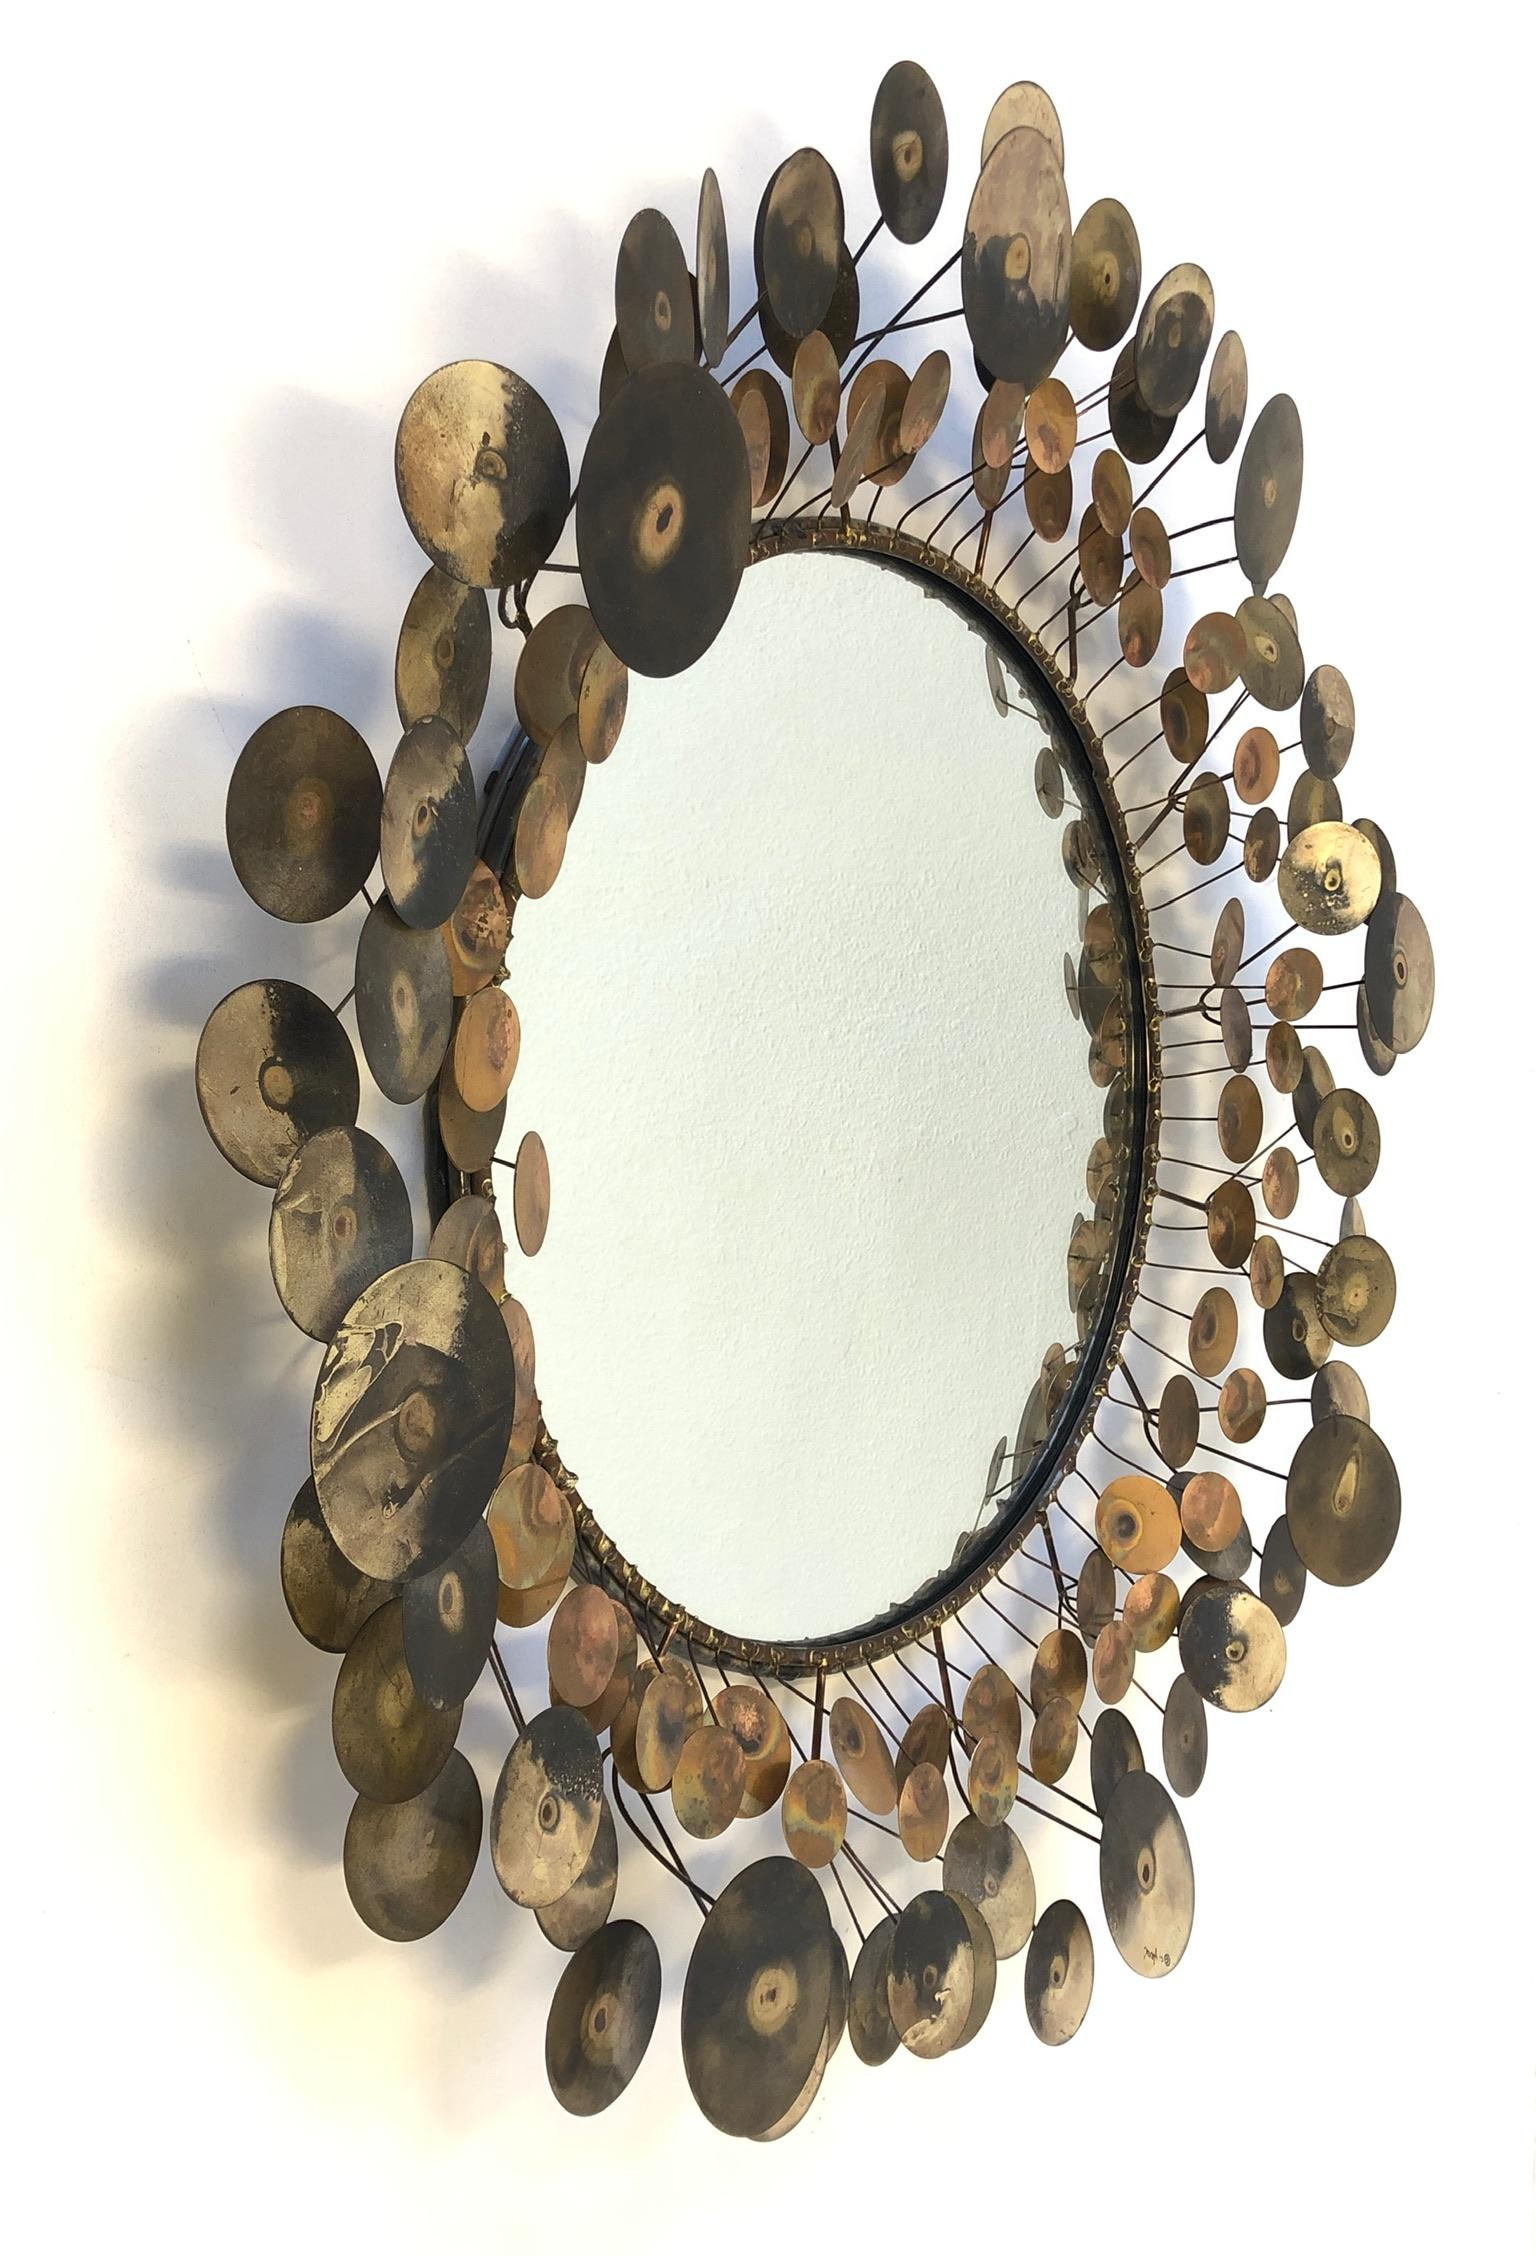 A glamorous 1970s “raindrops” mirror design by Curtis Jeré for Artisan House.
The frame is constructed of brass and copper. The mirror is in original condition, it retains the beautiful patina and signature. 

Measurements: 34” diameter and 5”